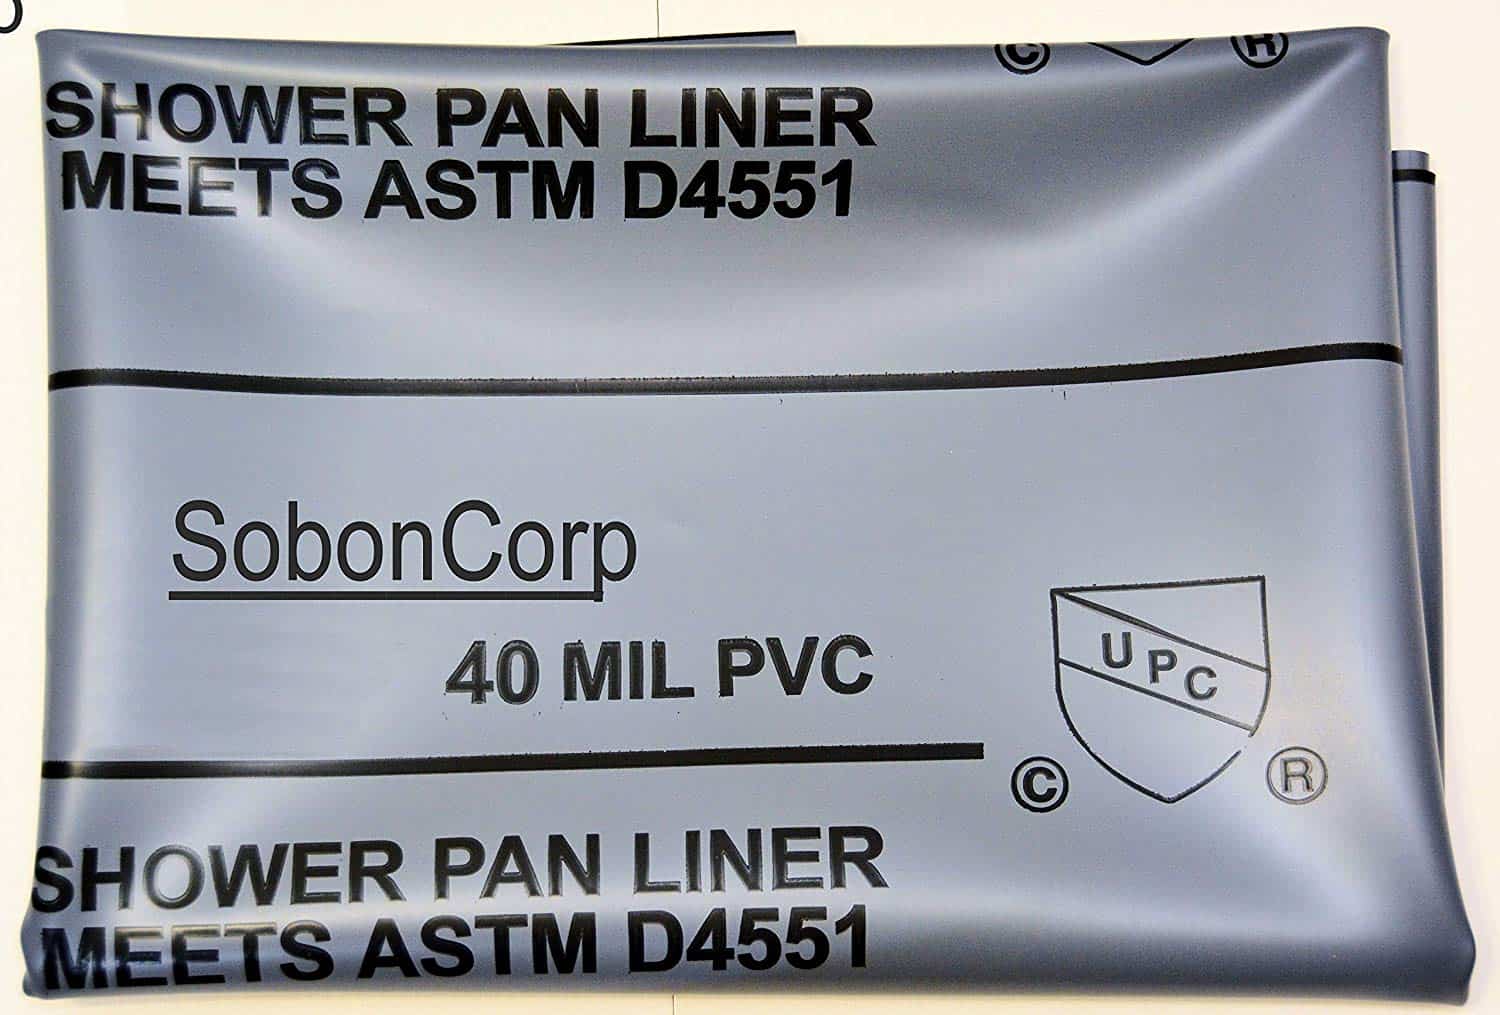 What is a shower pan liner made of